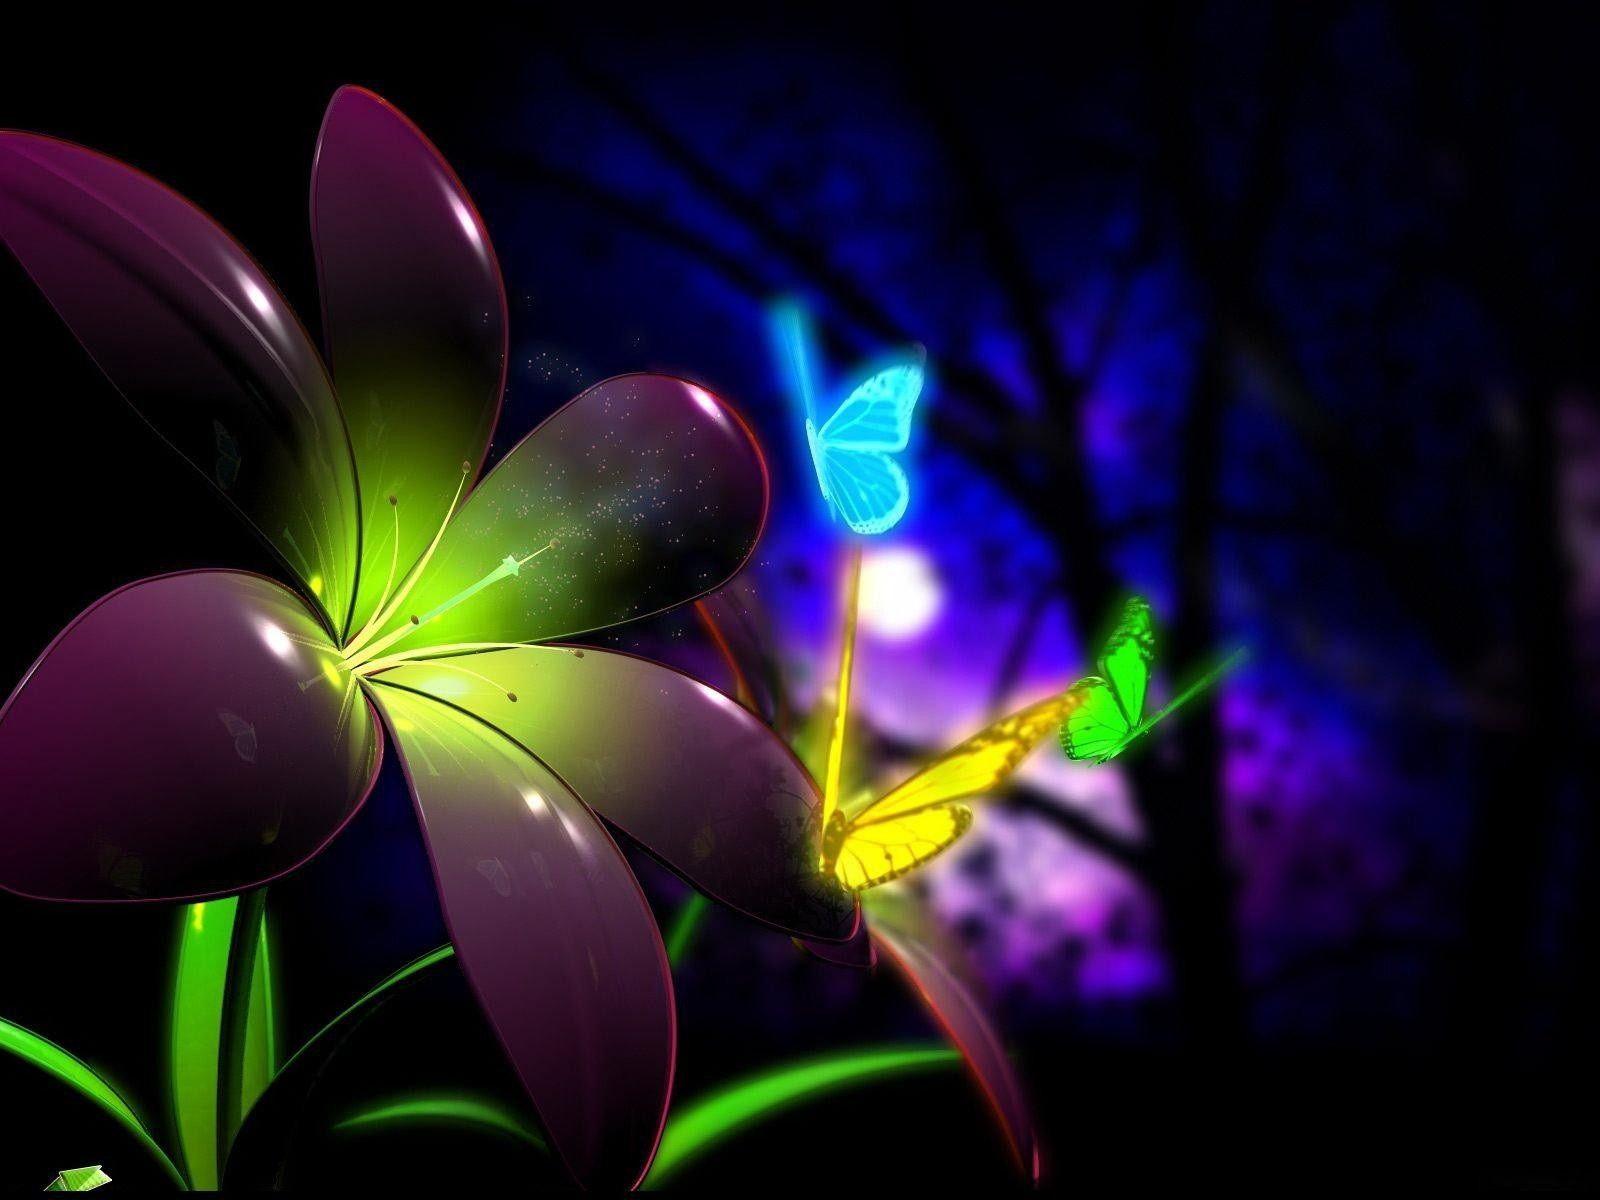 Shine butterfly and flowers at night. HD Wallpaper Rocks